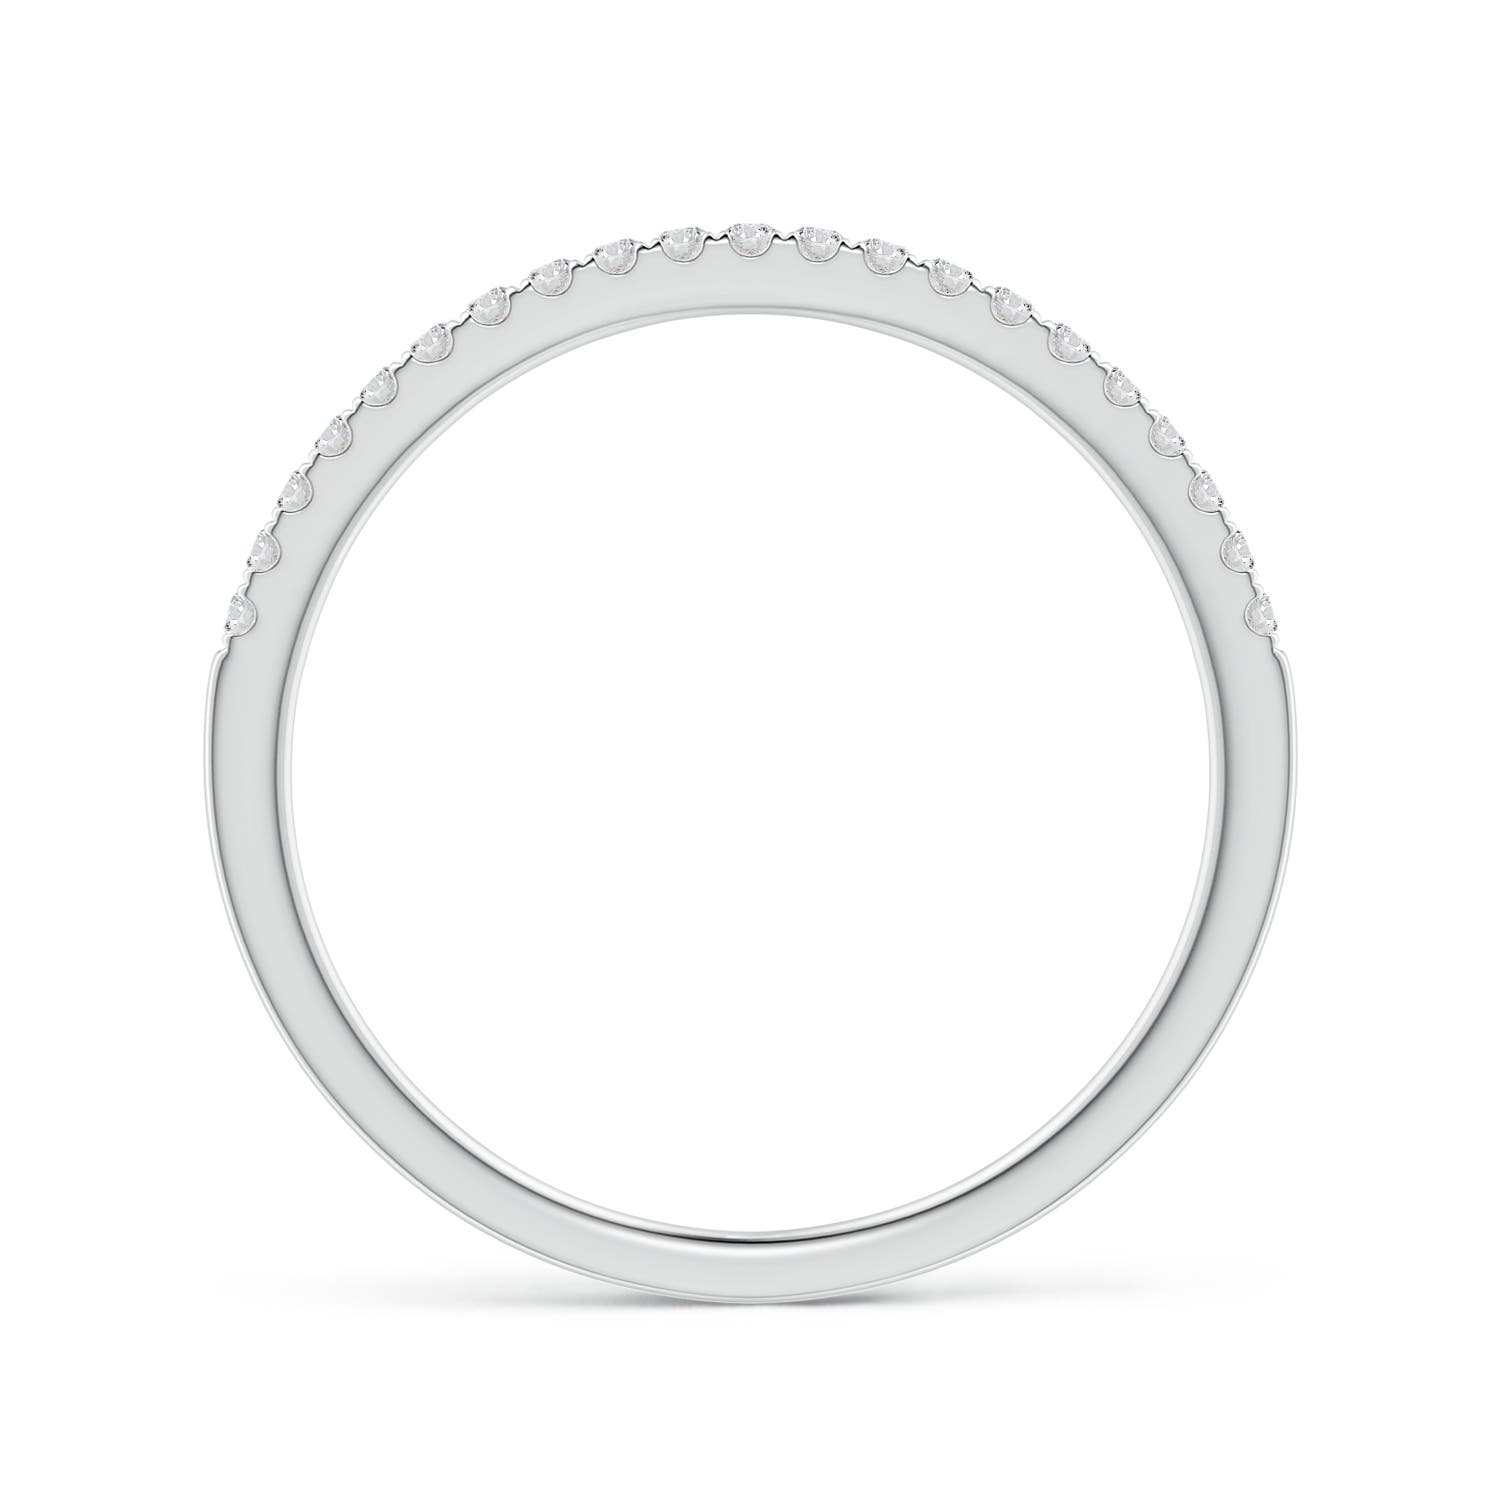 H, SI2 / 0.11 CT / 14 KT White Gold